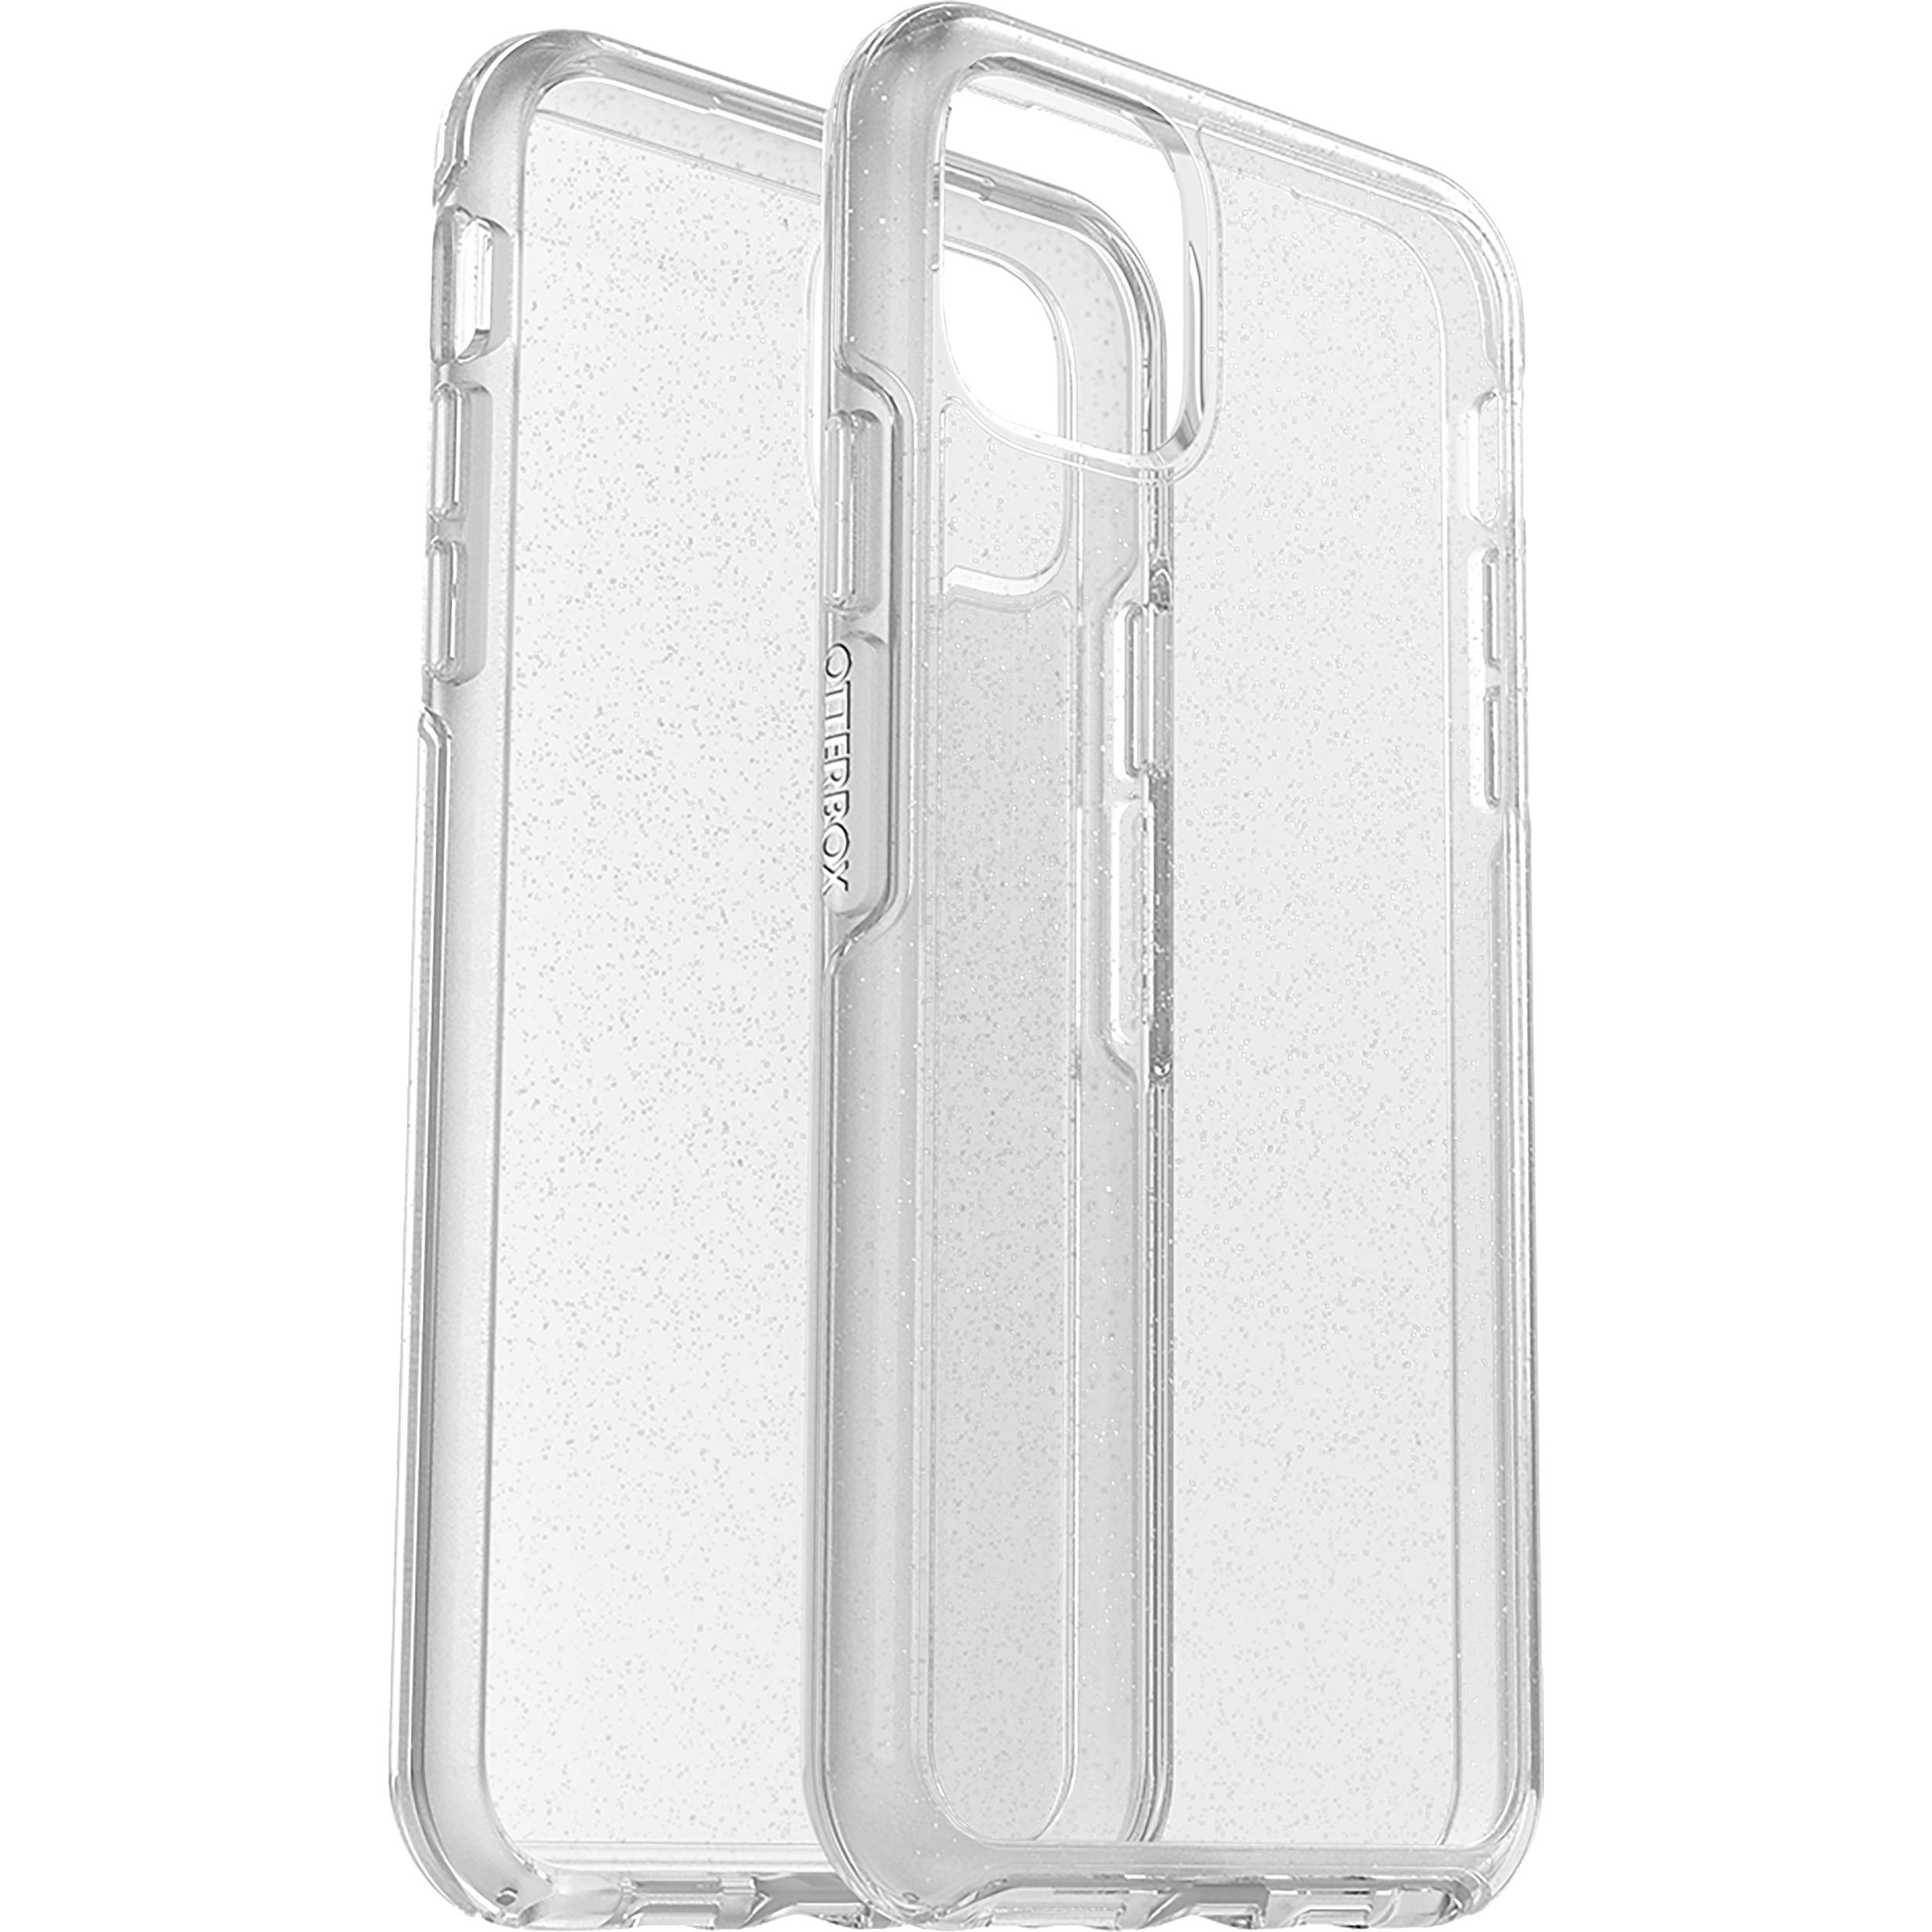 Otterbox Symmetry Series Clear Case For Iphone 11 Pro 77